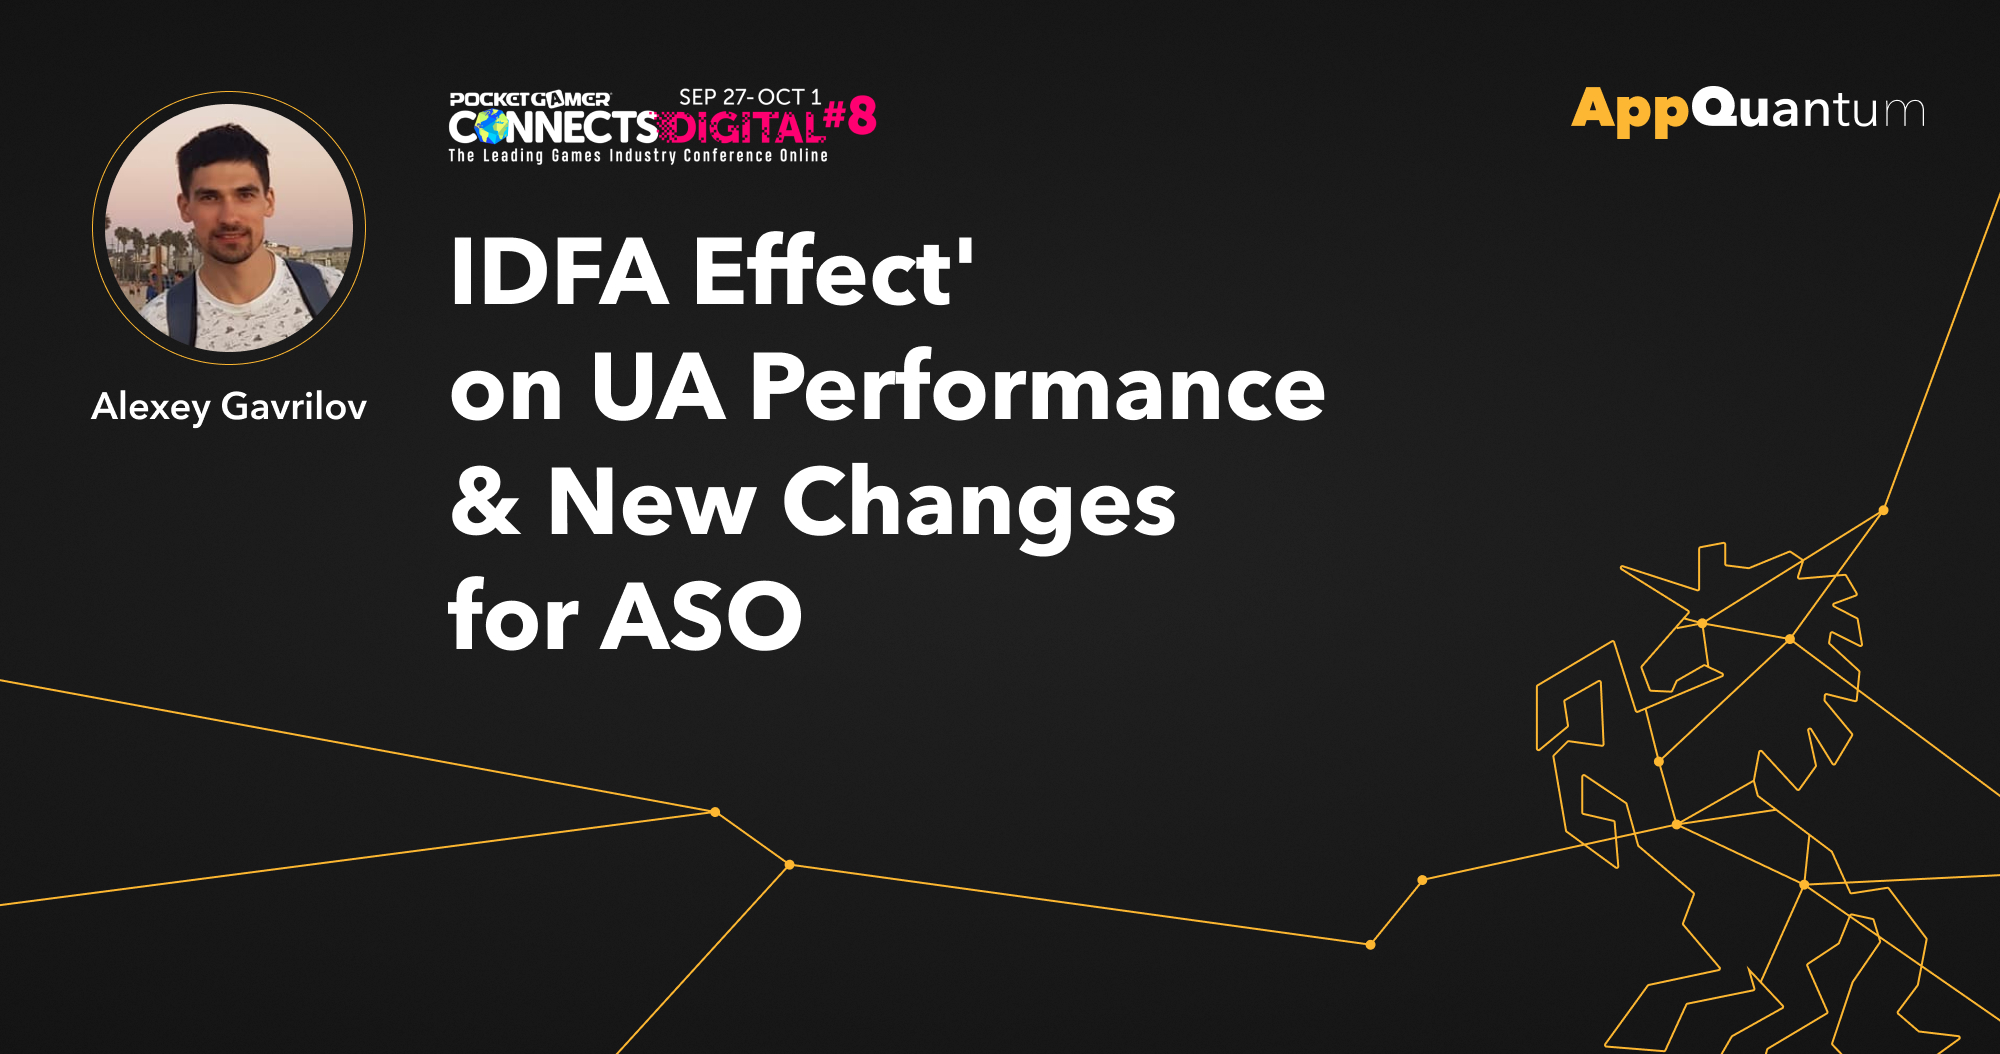 Panel Discussion of IDFA Effect' on UA Performance & New Changes for ASO with Alexey Gavrilov